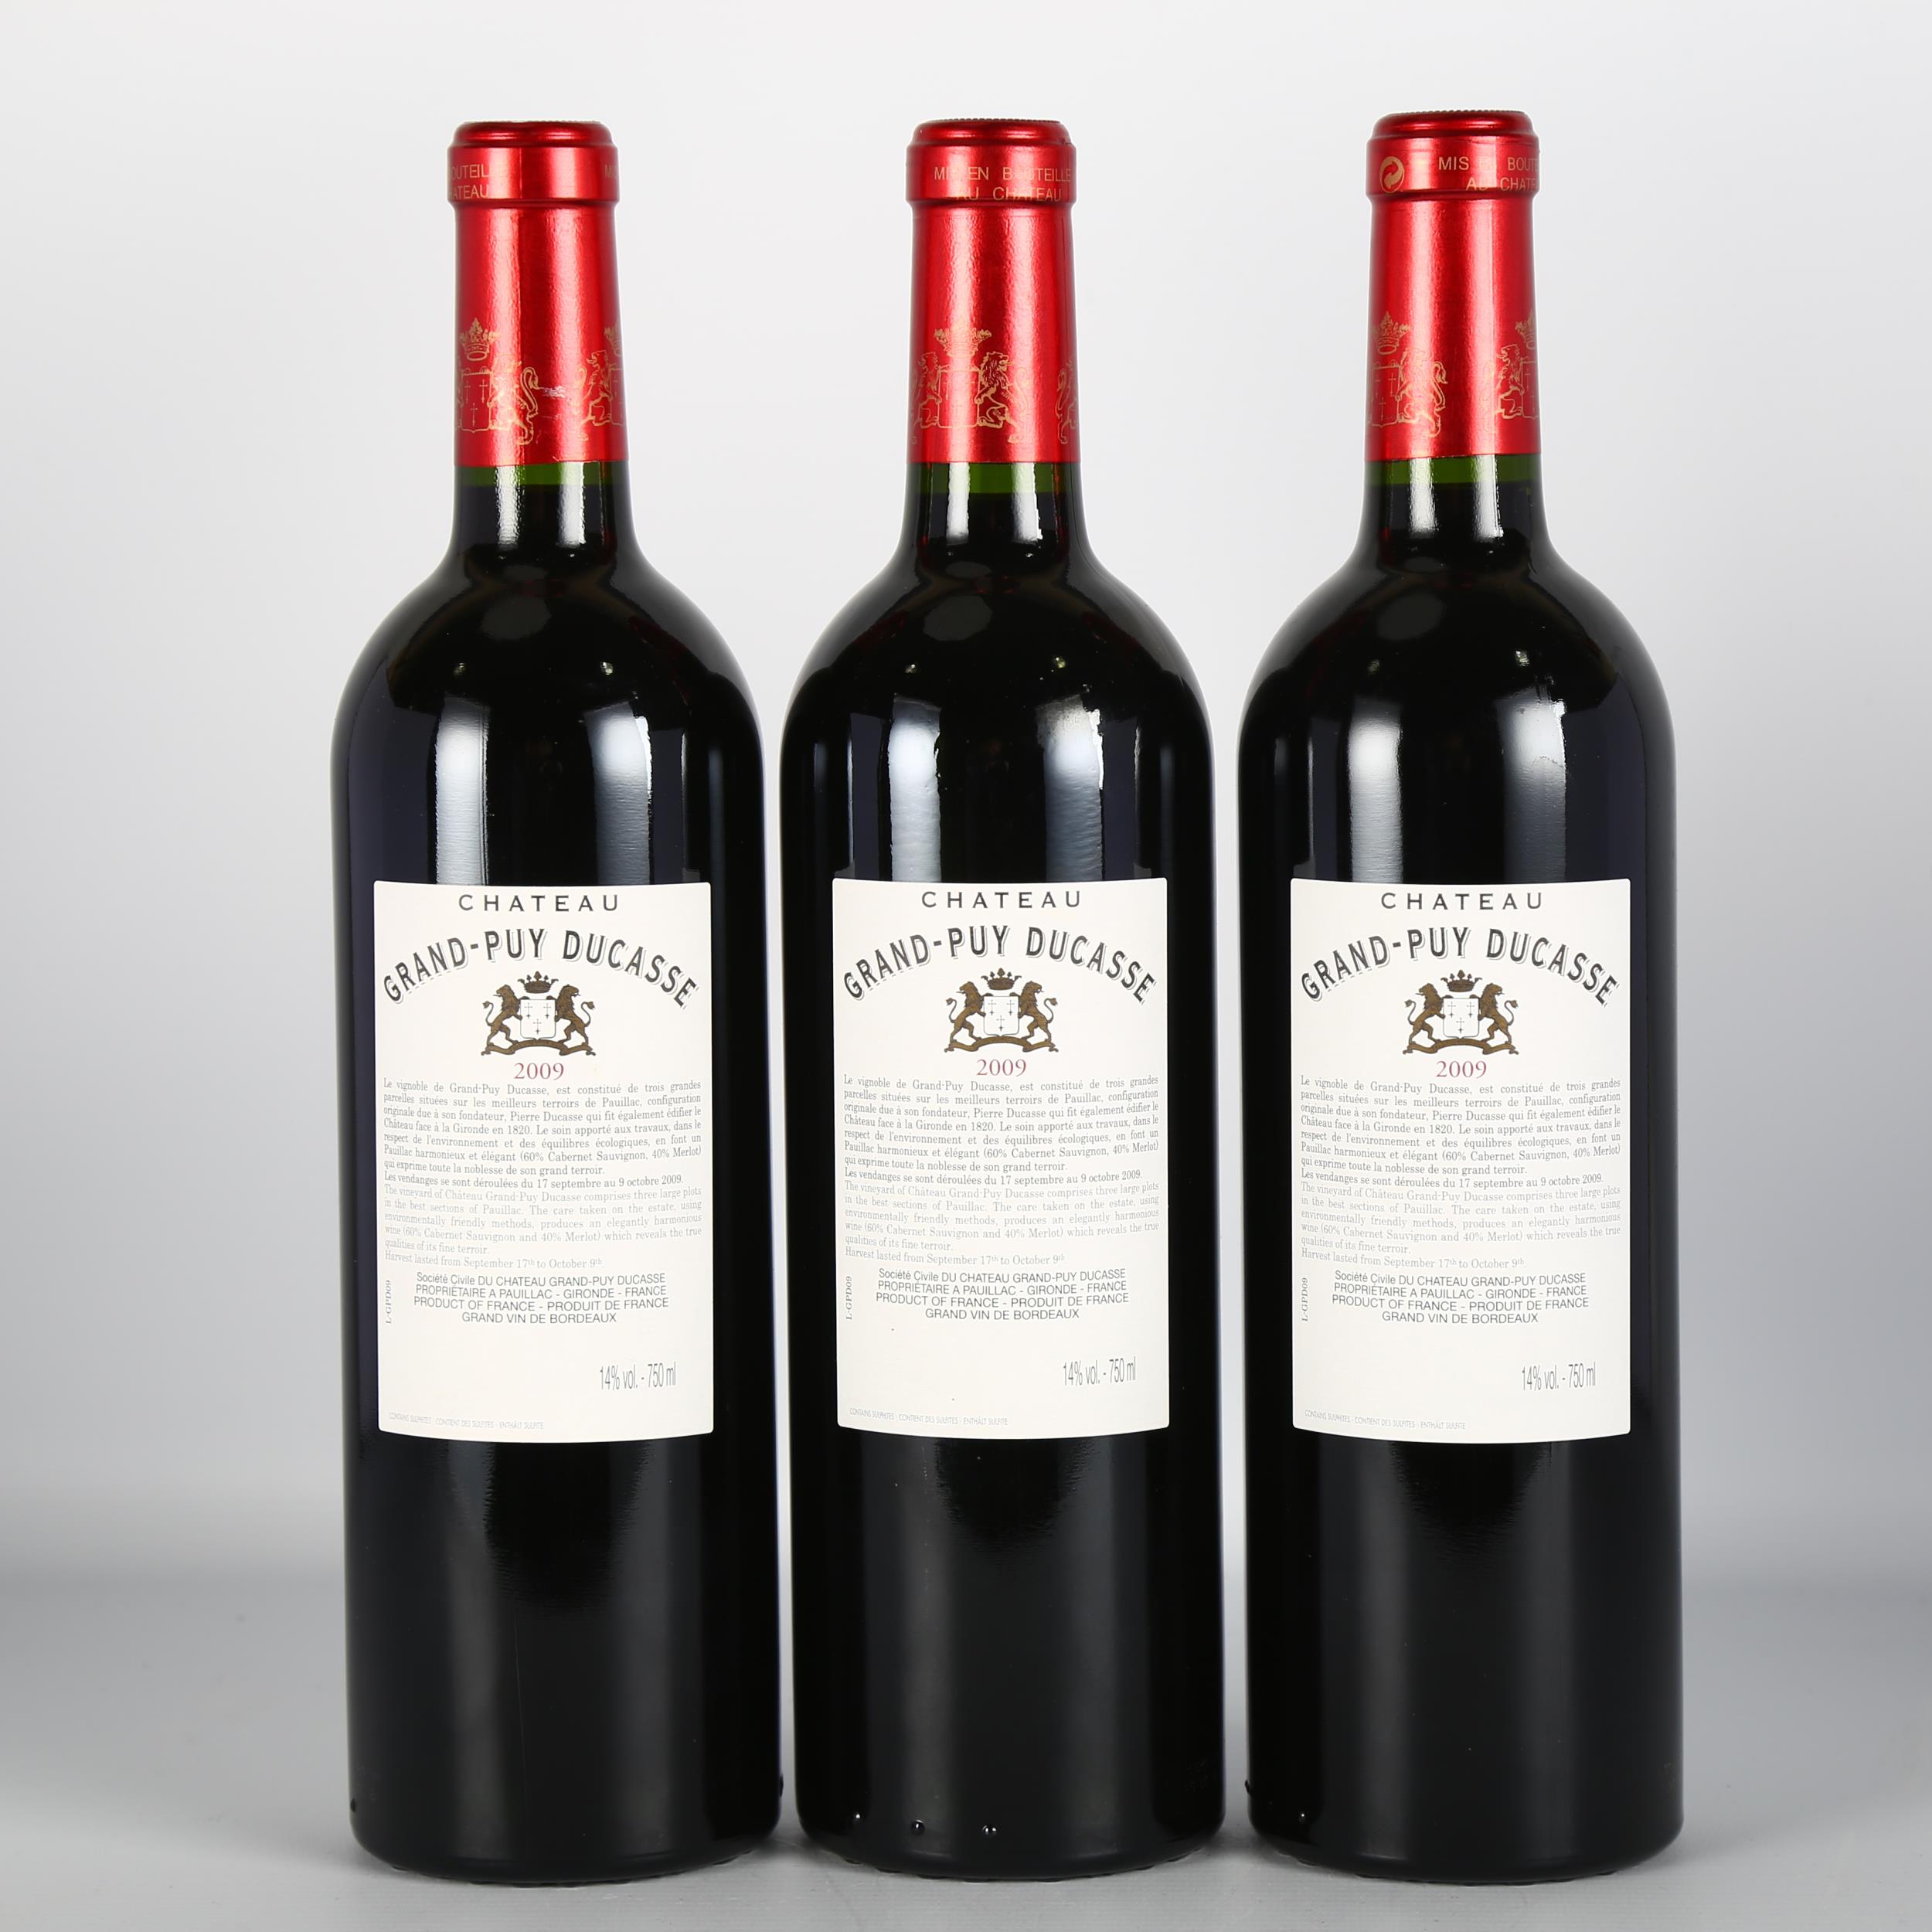 Chateau Grand-Puy Ducasse 2009, Pauillac x 3 bottles. 93 points Wine Spectator. 17 points Jancis - Image 2 of 3